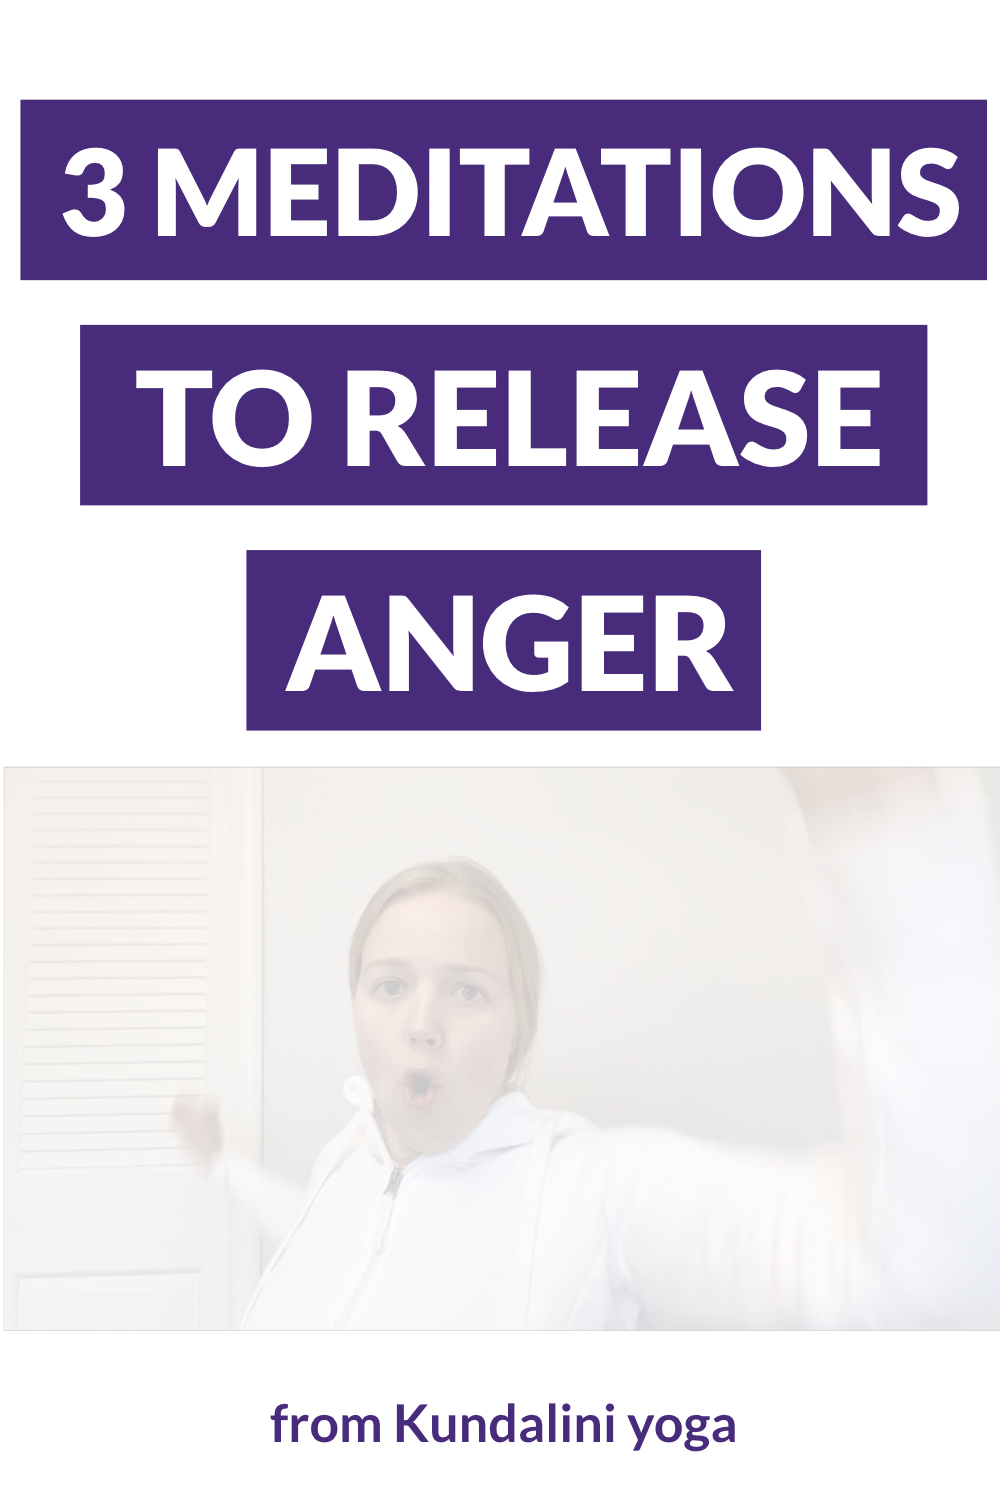 3 meditations to release anger